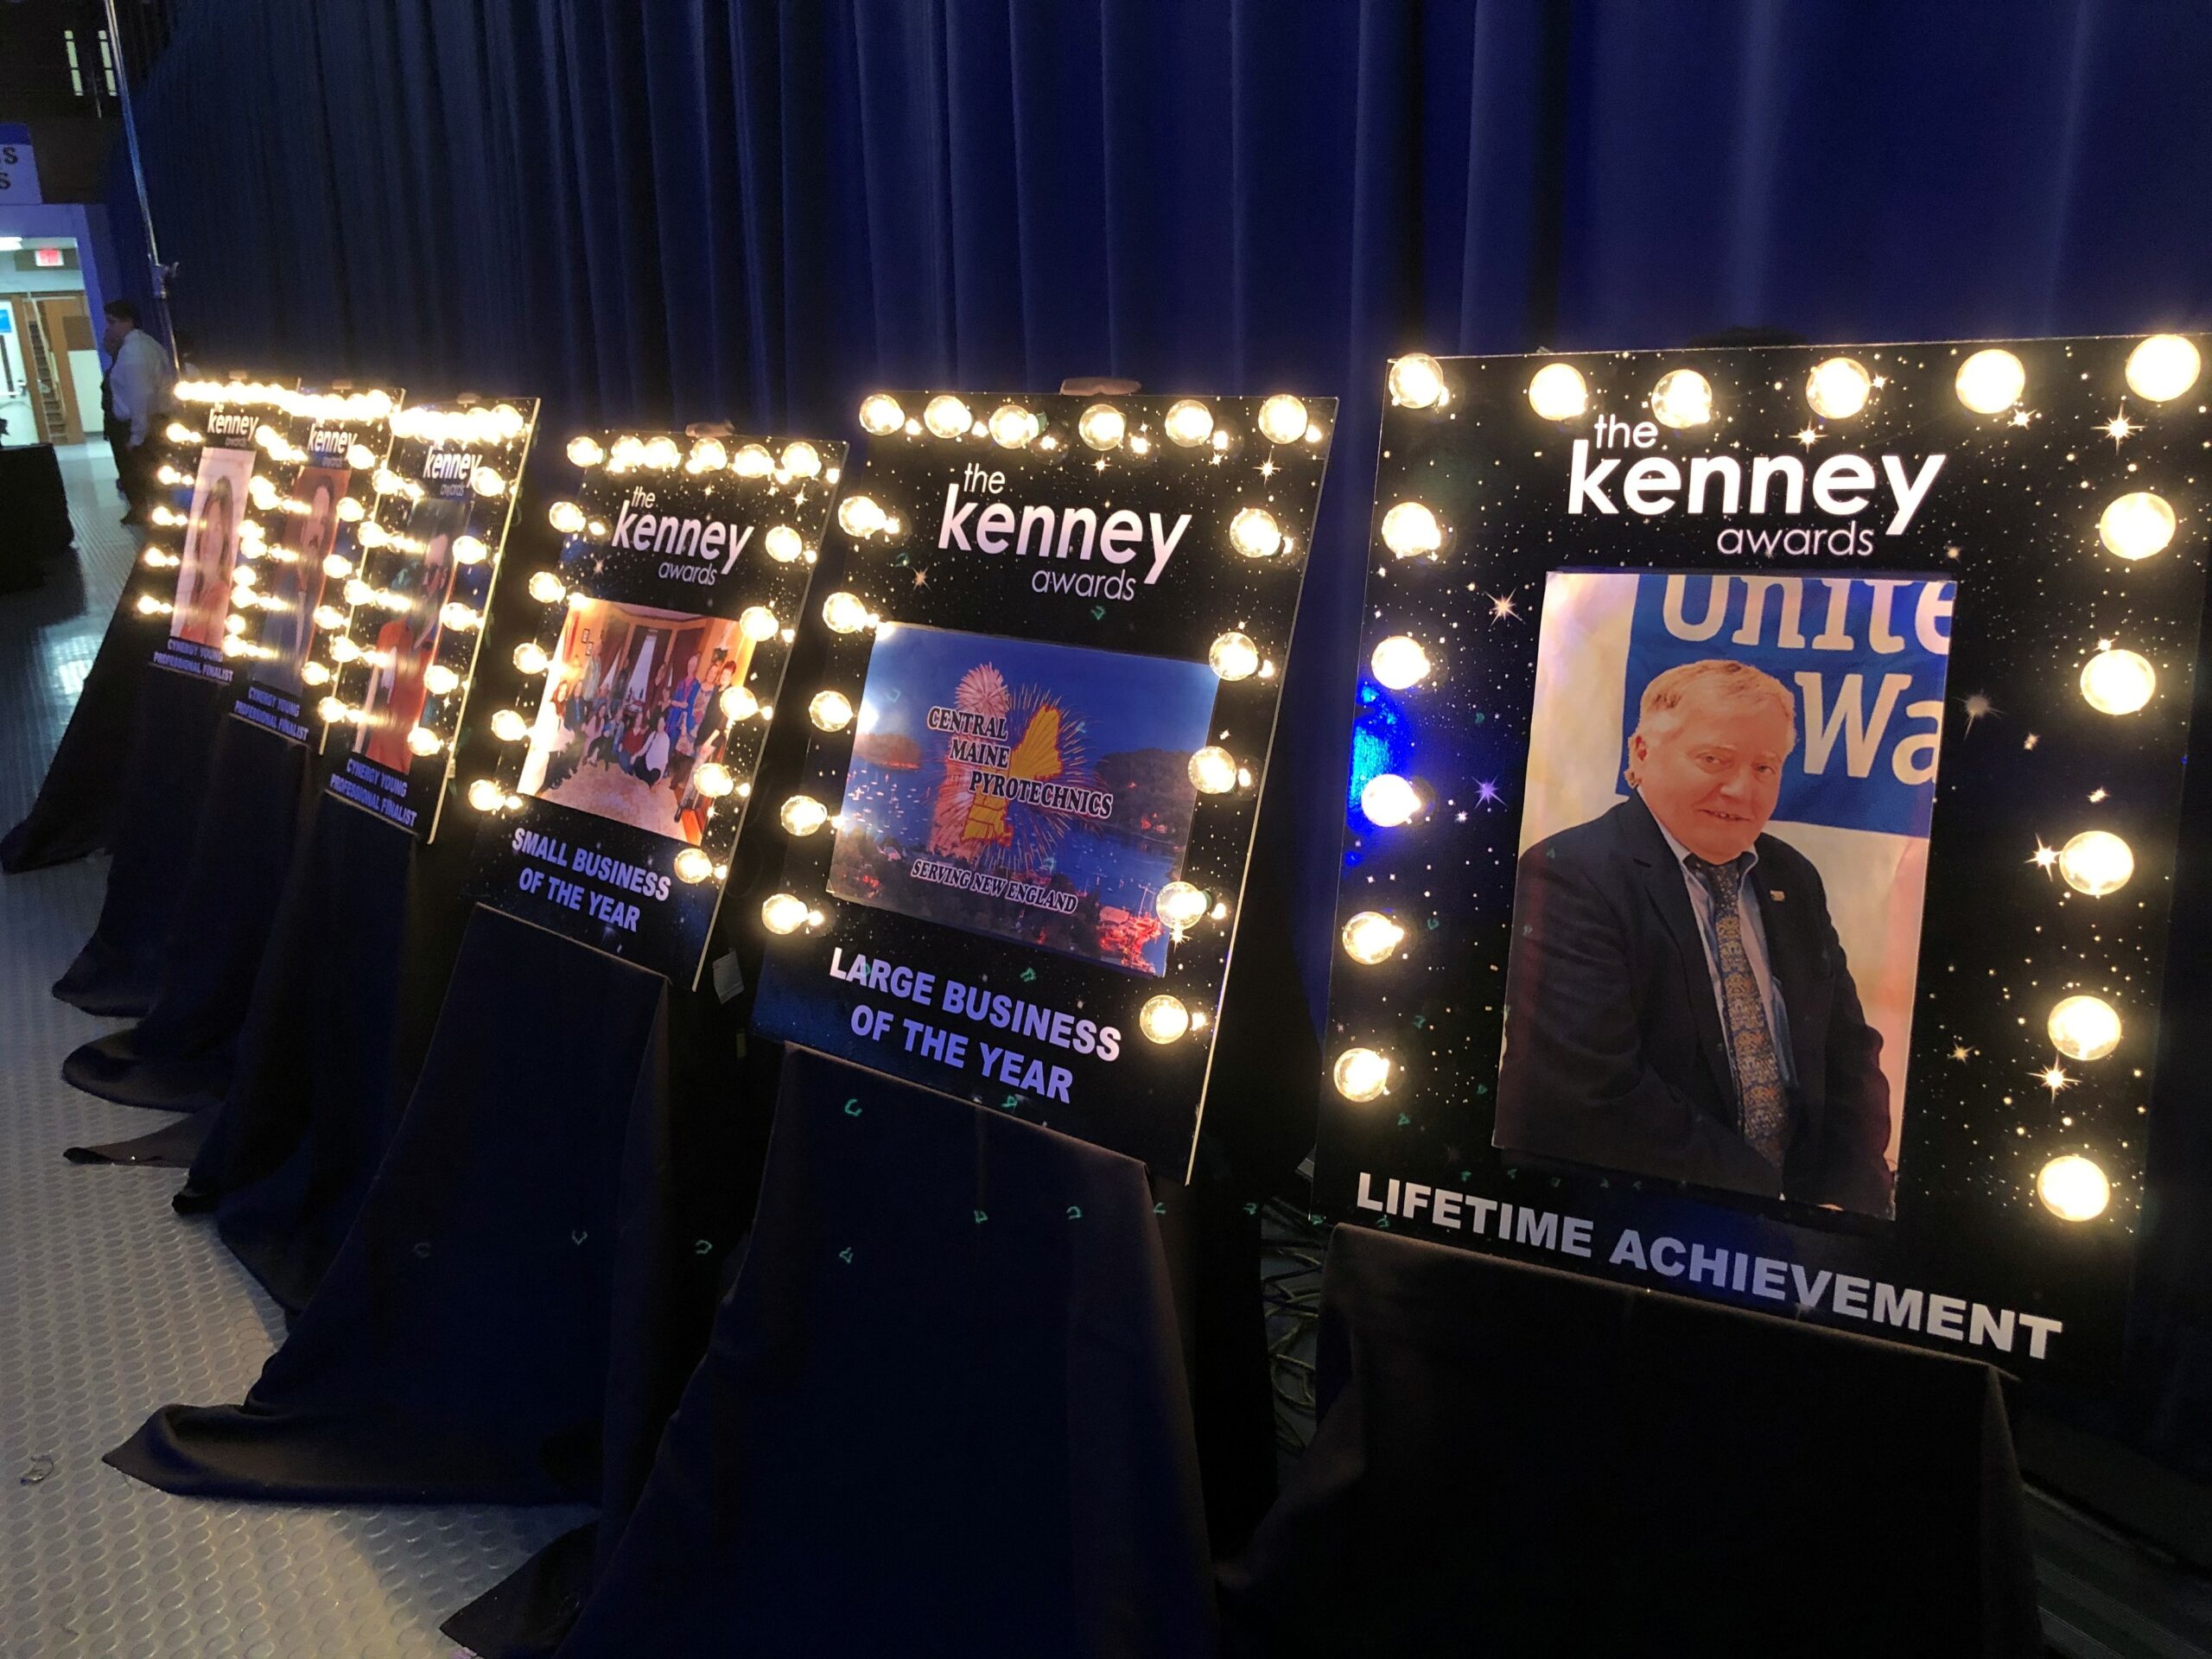 The Kenney Awards celebrate the achievements of the Kennebec Valley business community